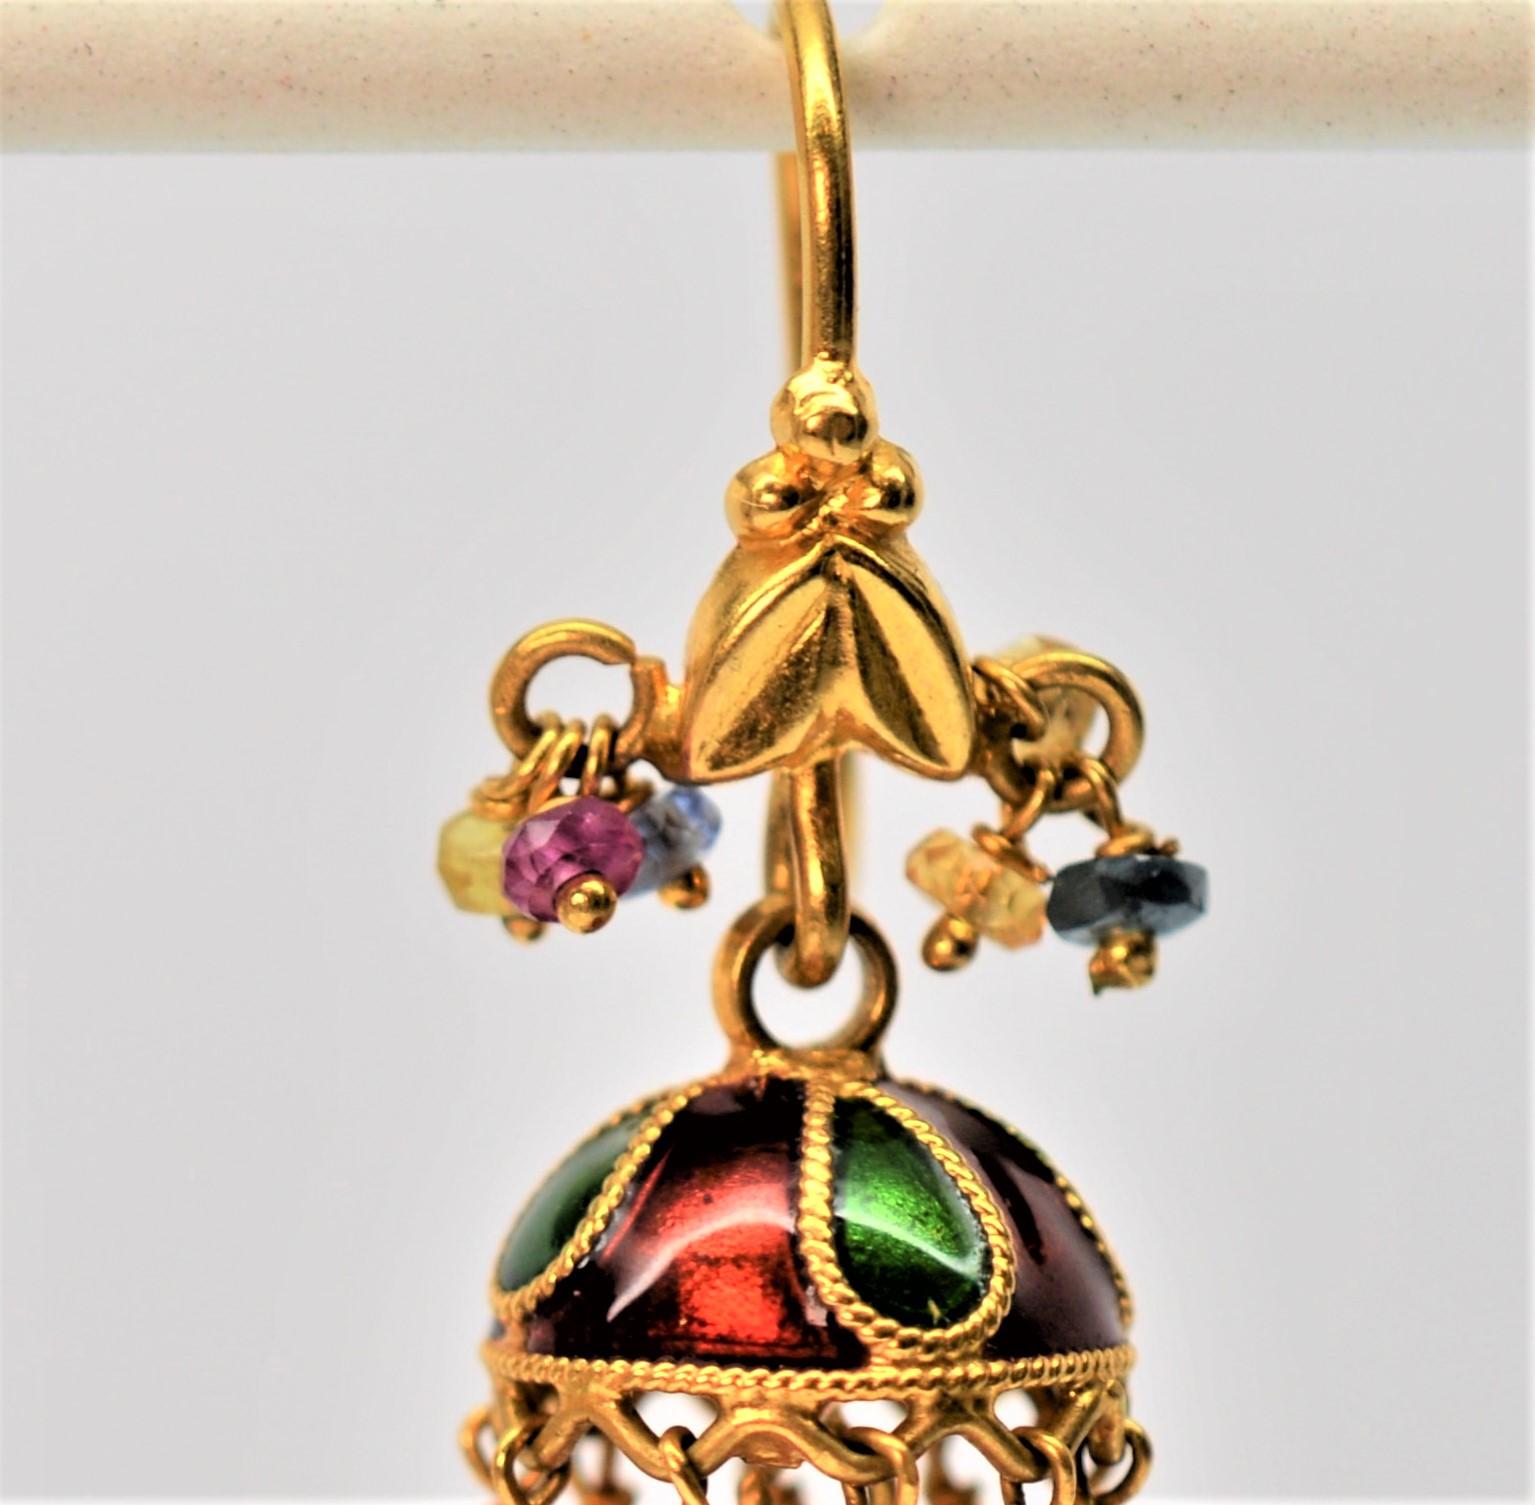 Artisan 22 Karat Yellow Gold Emerald and Ruby Earrings with Enamel Accents